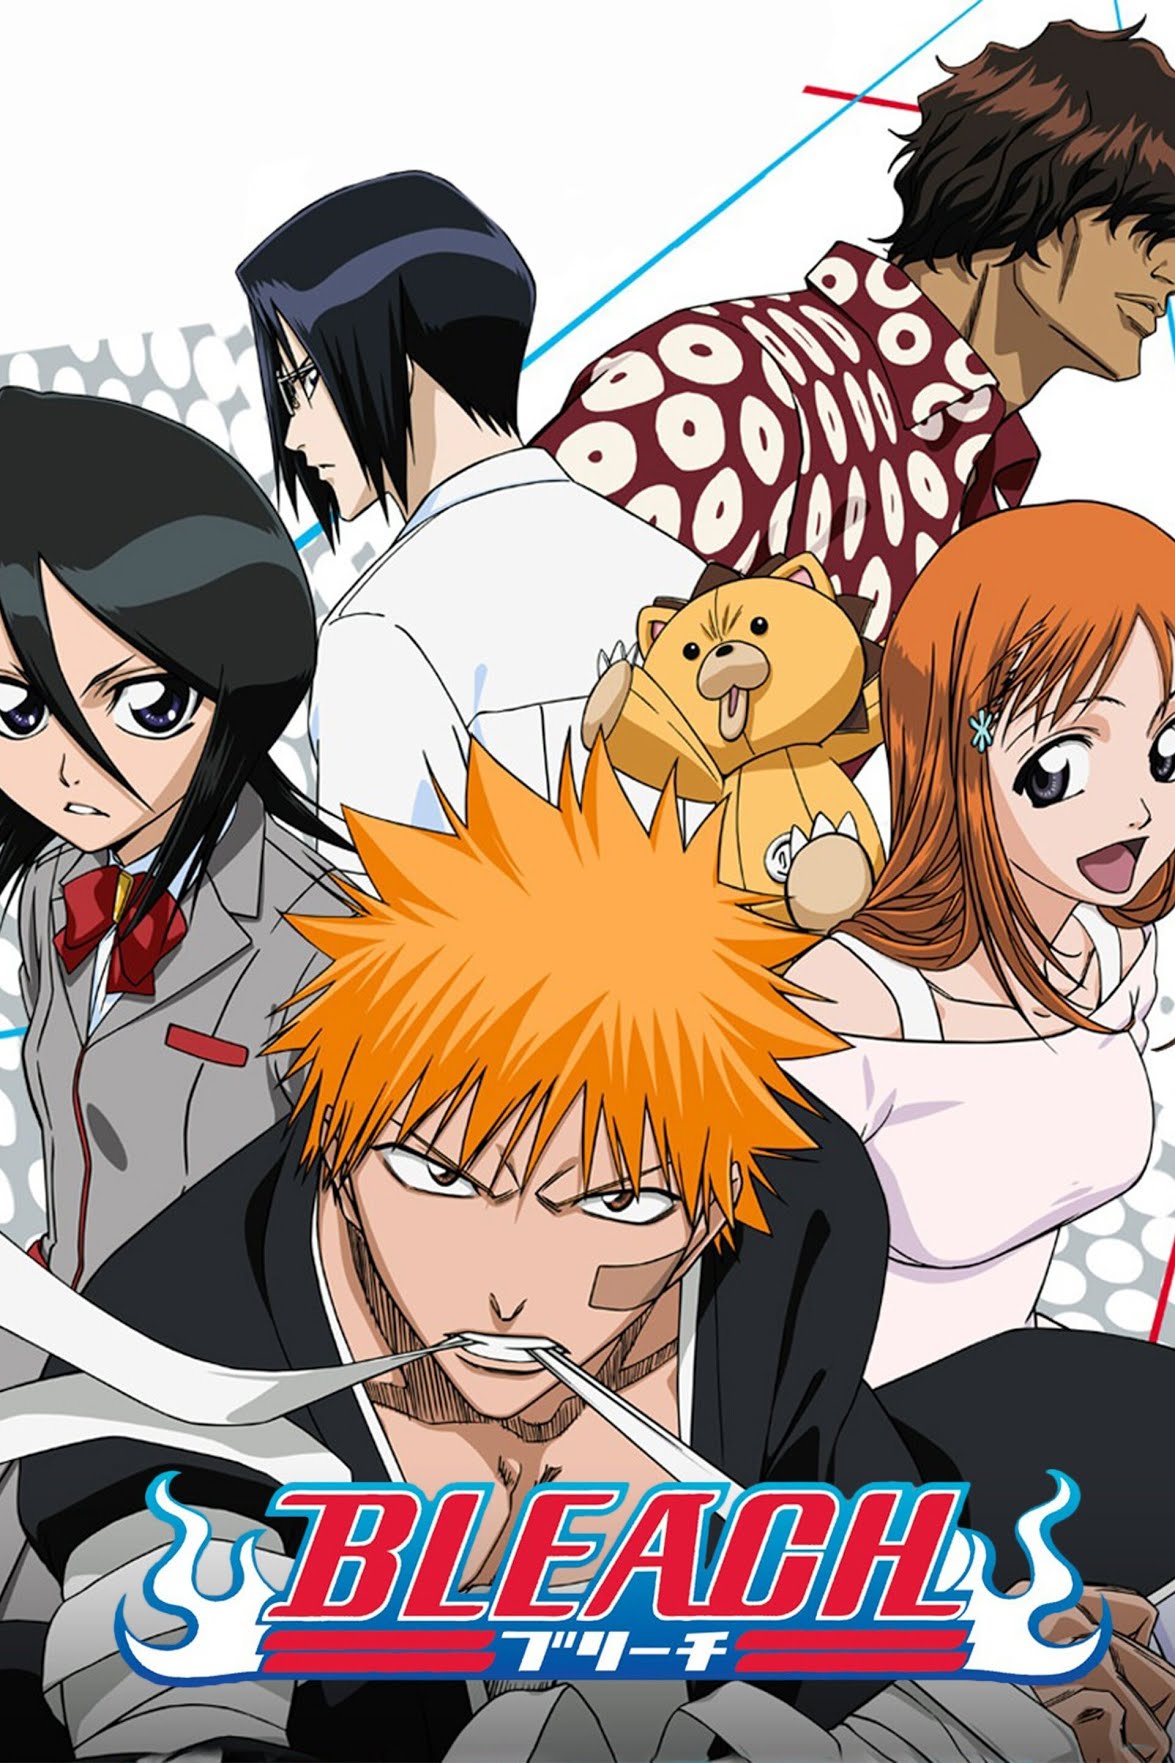 25 Most Underrated Anime Series